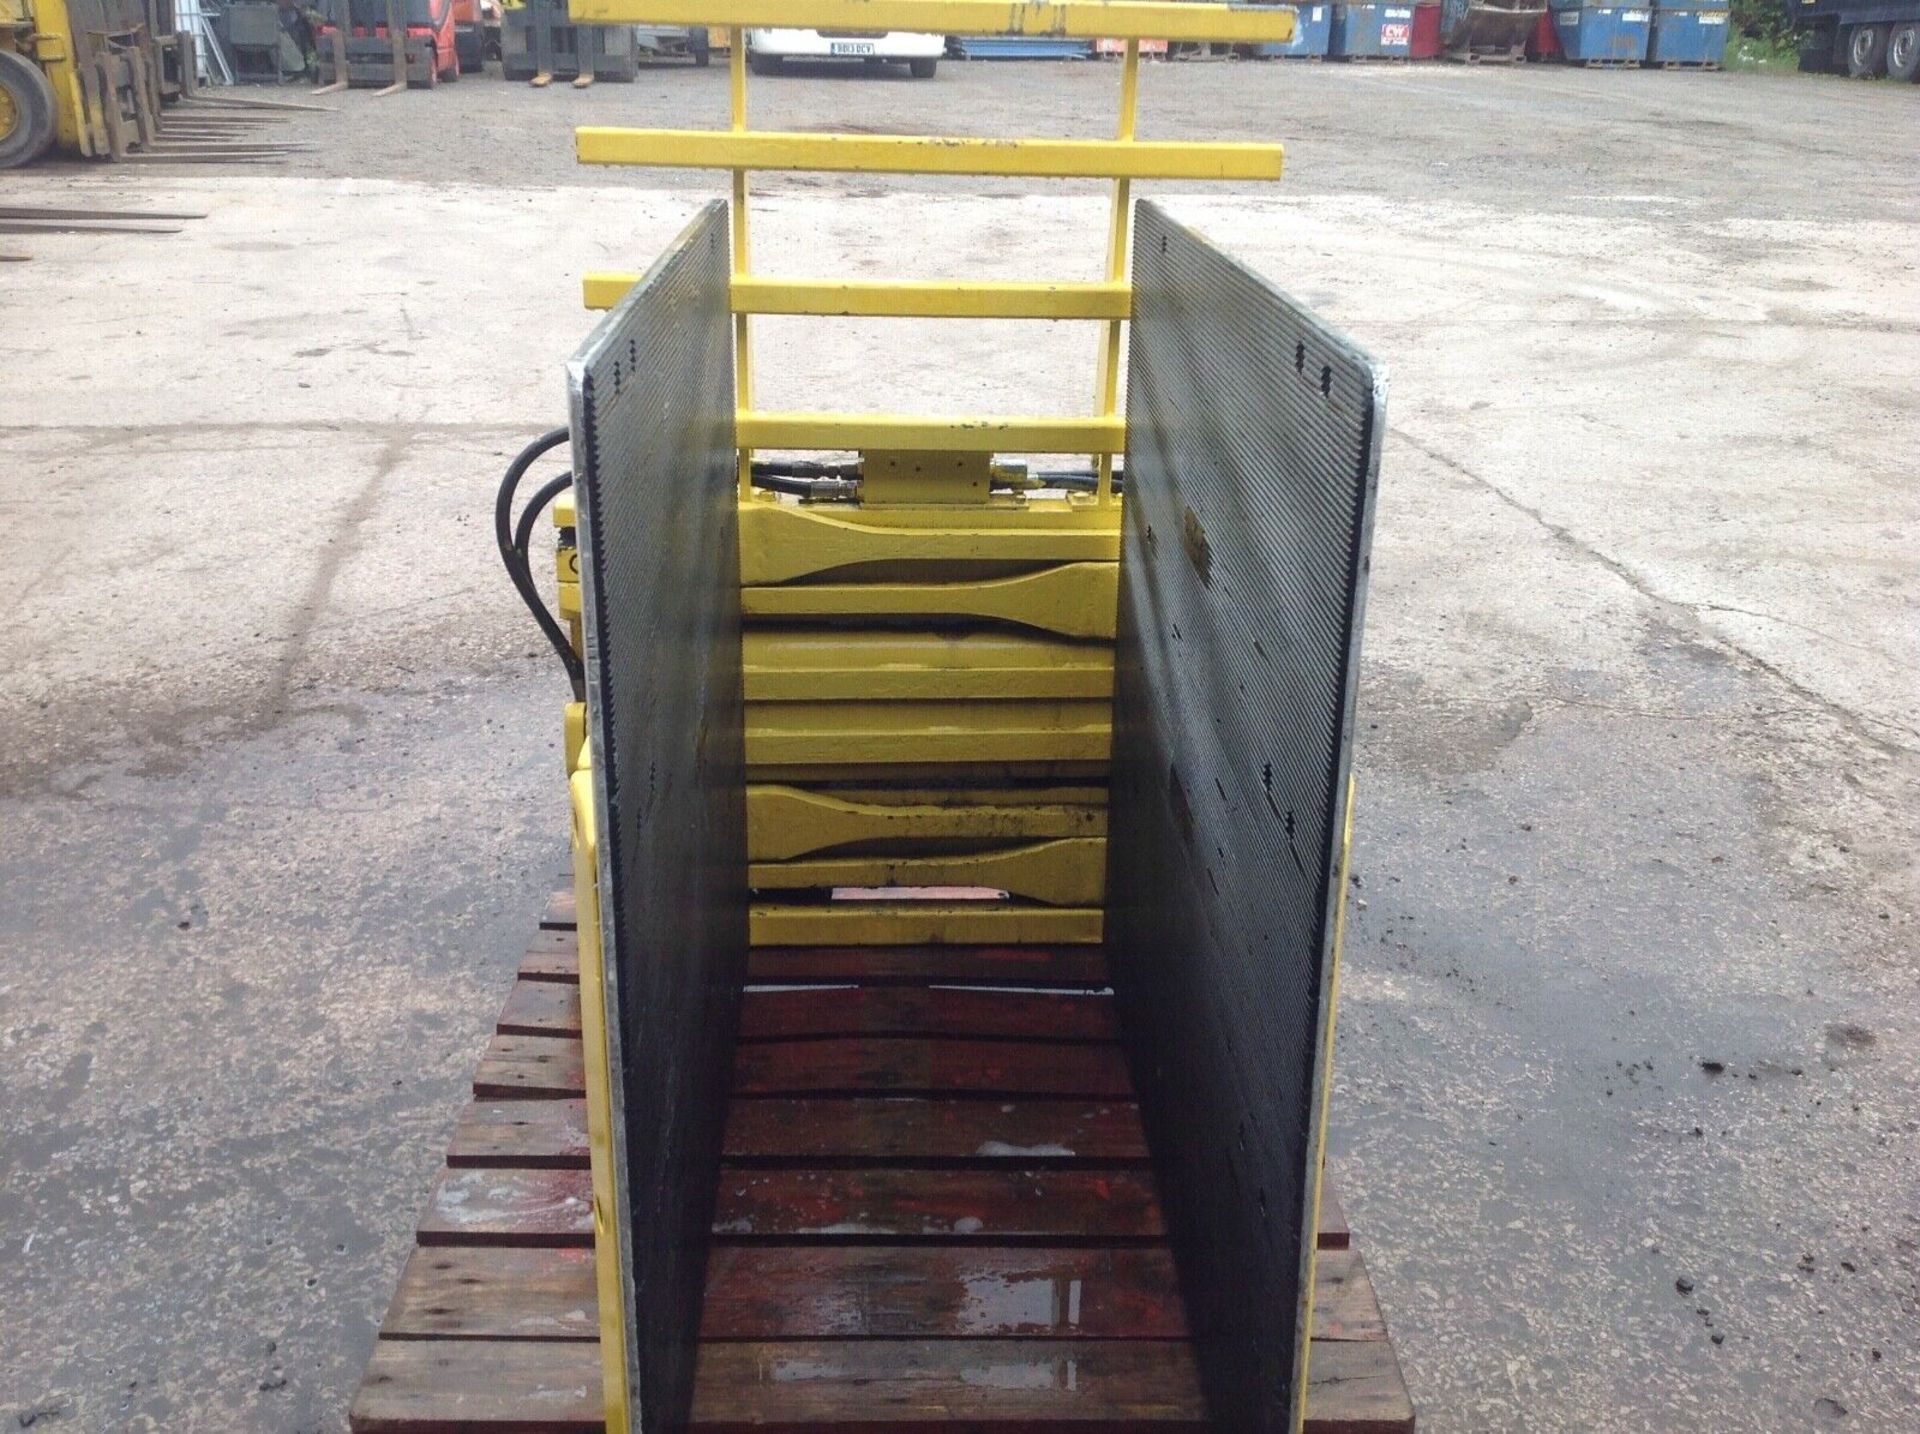 Cascade forklift bale grab attachment - Image 2 of 5